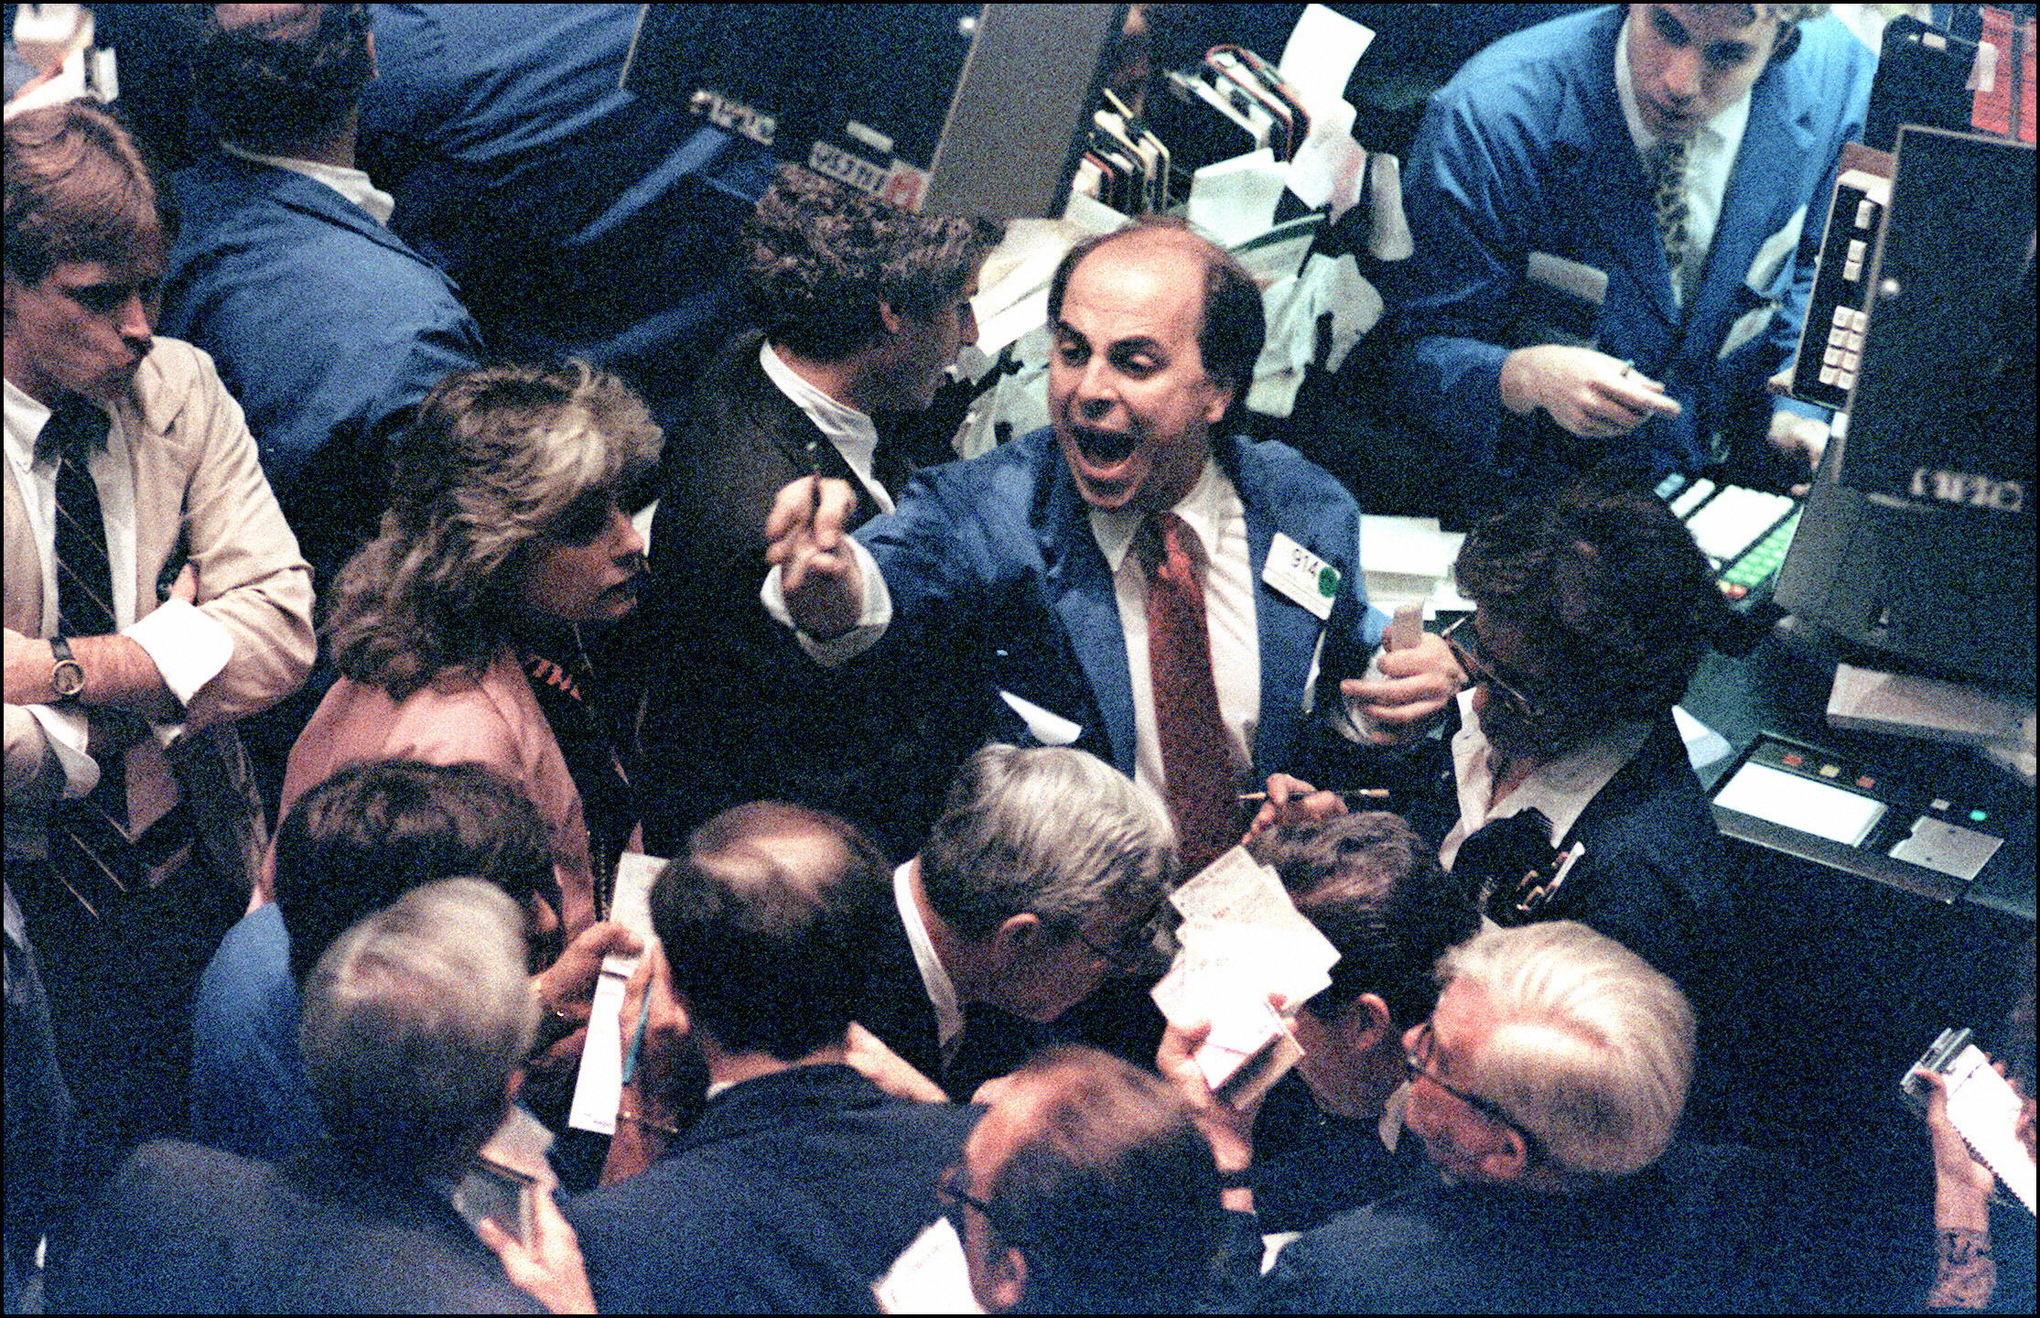 A trader (c) on the New York Stock Exchange shouts